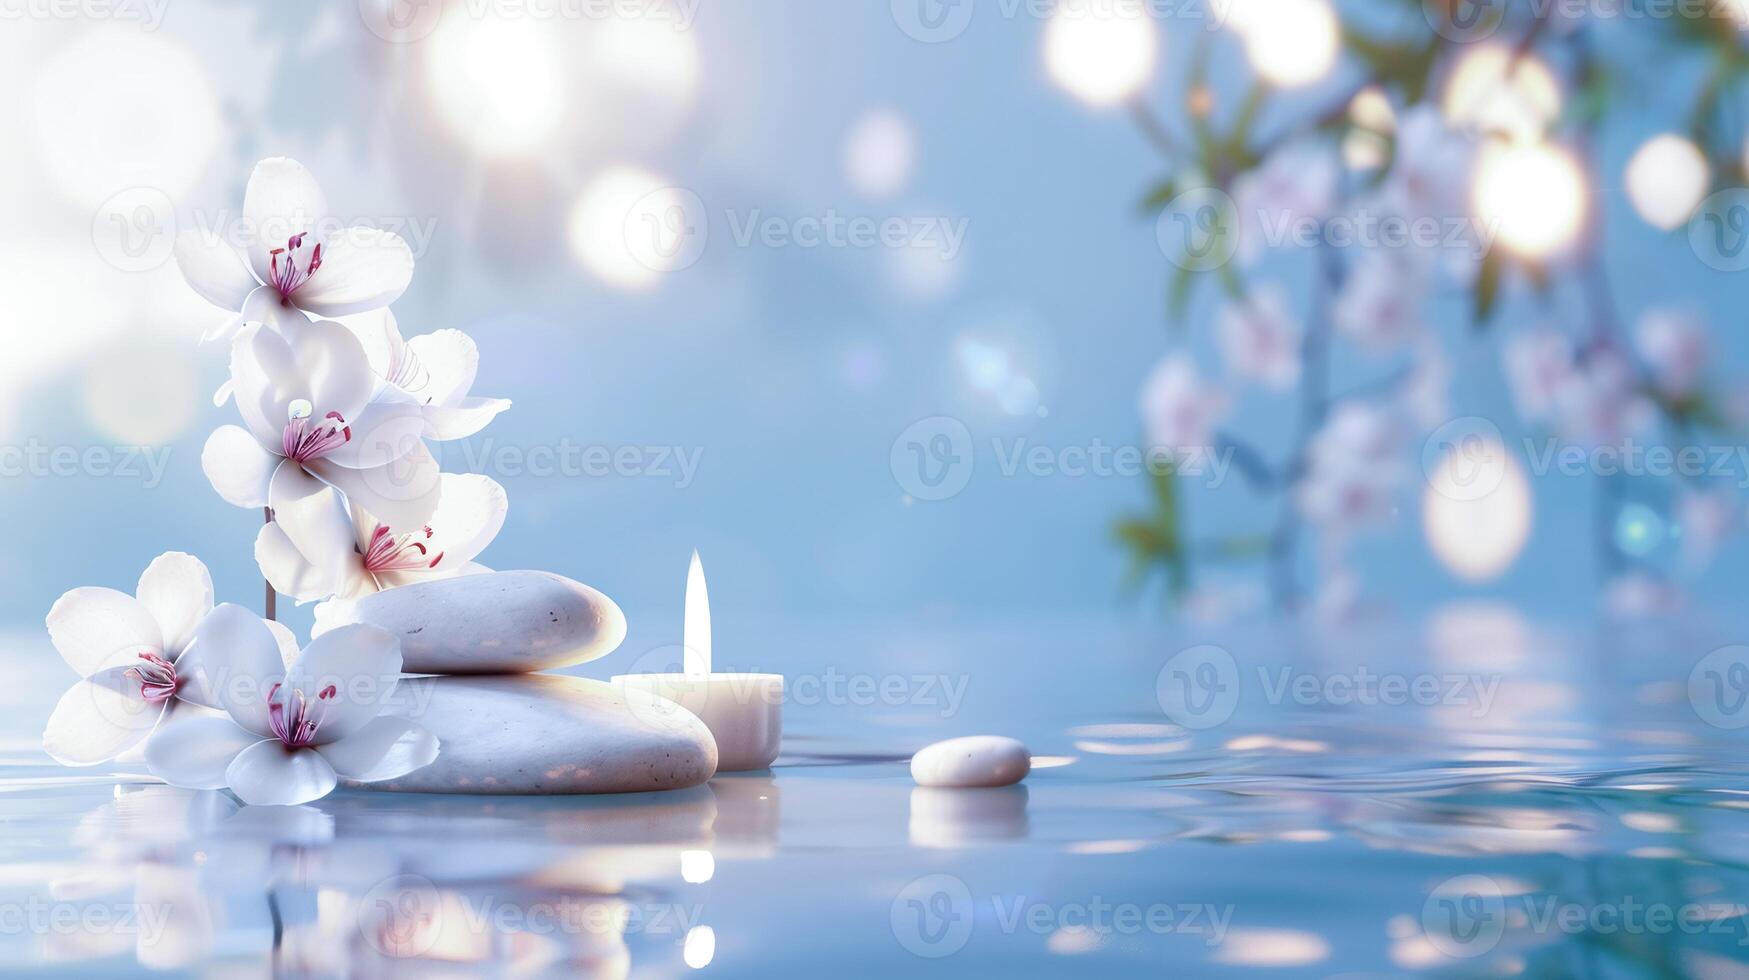 Spa tranquility with orchids on stones, candlelit water reflection for a peaceful, meditative ambiance photo